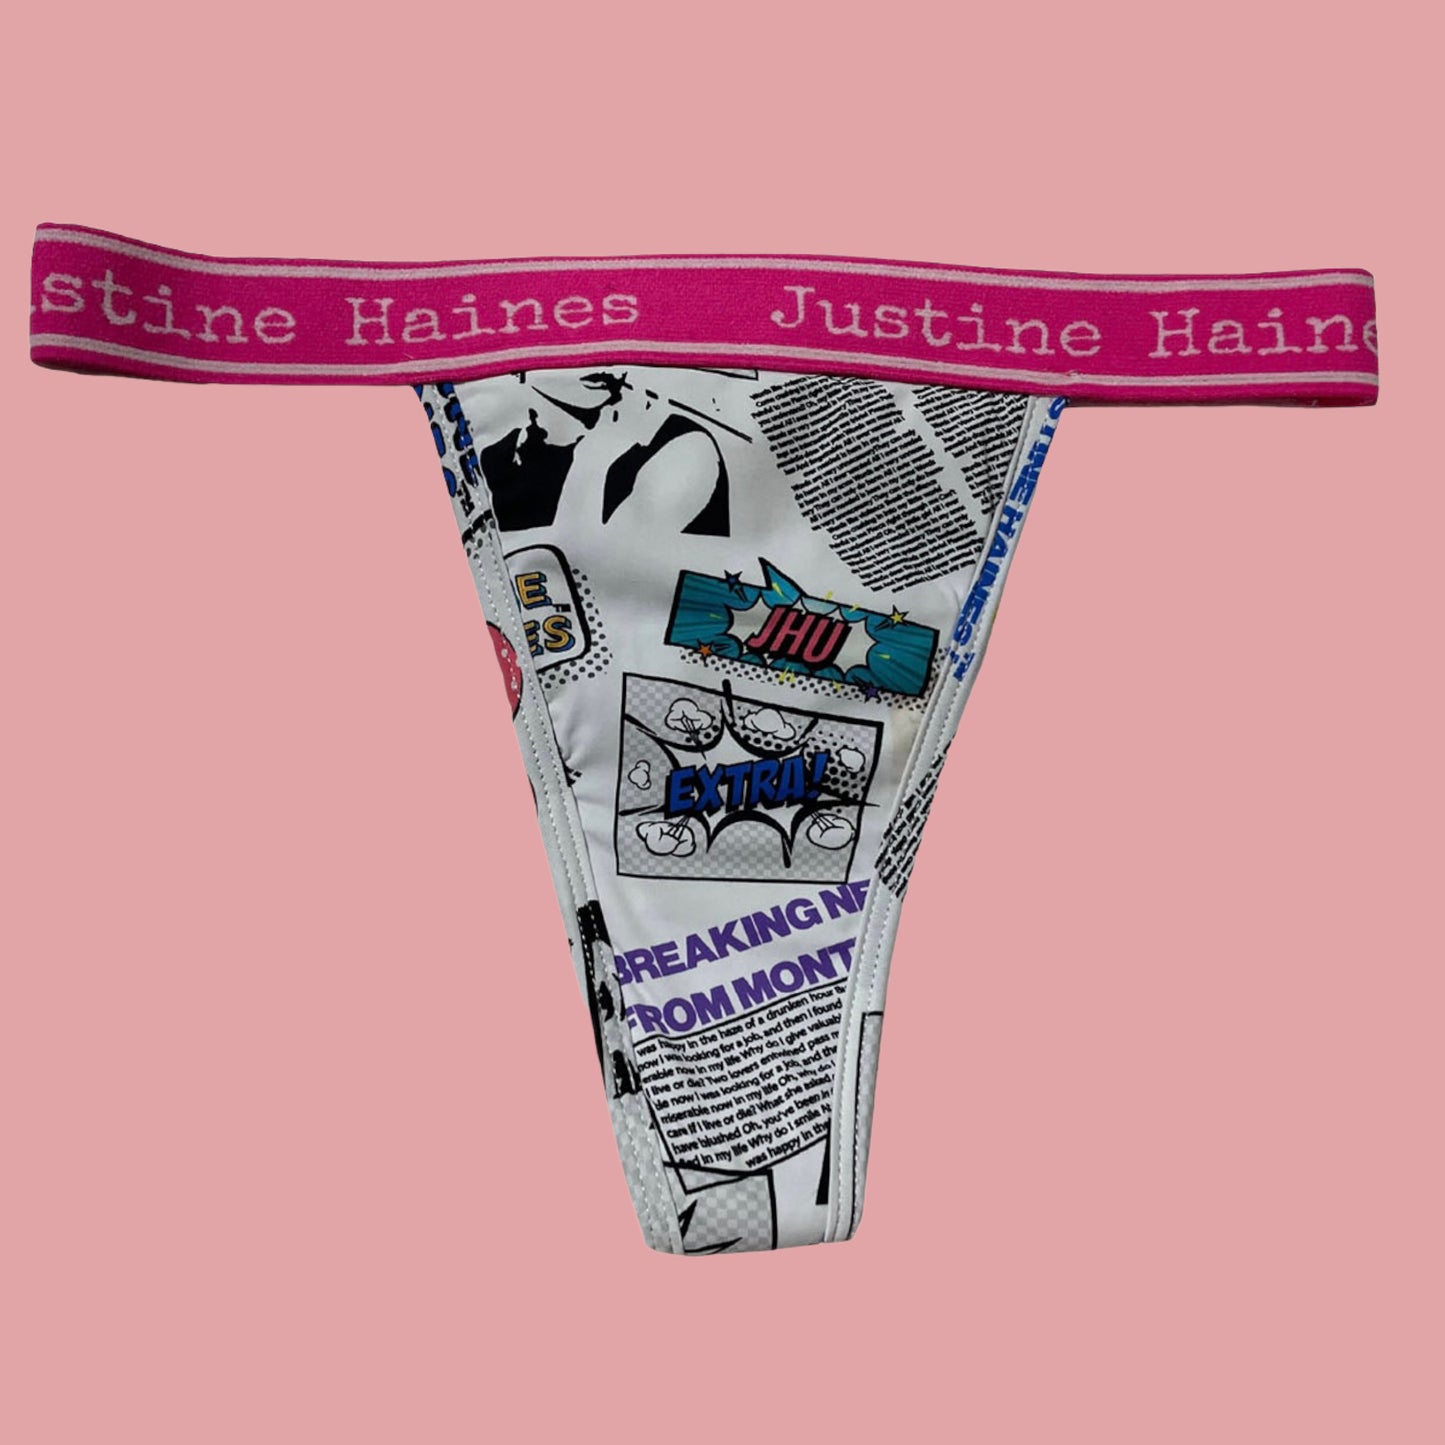 https://www.justinehaines.com/products/wear-thongs-on-your-period-fashion-newspaper-print